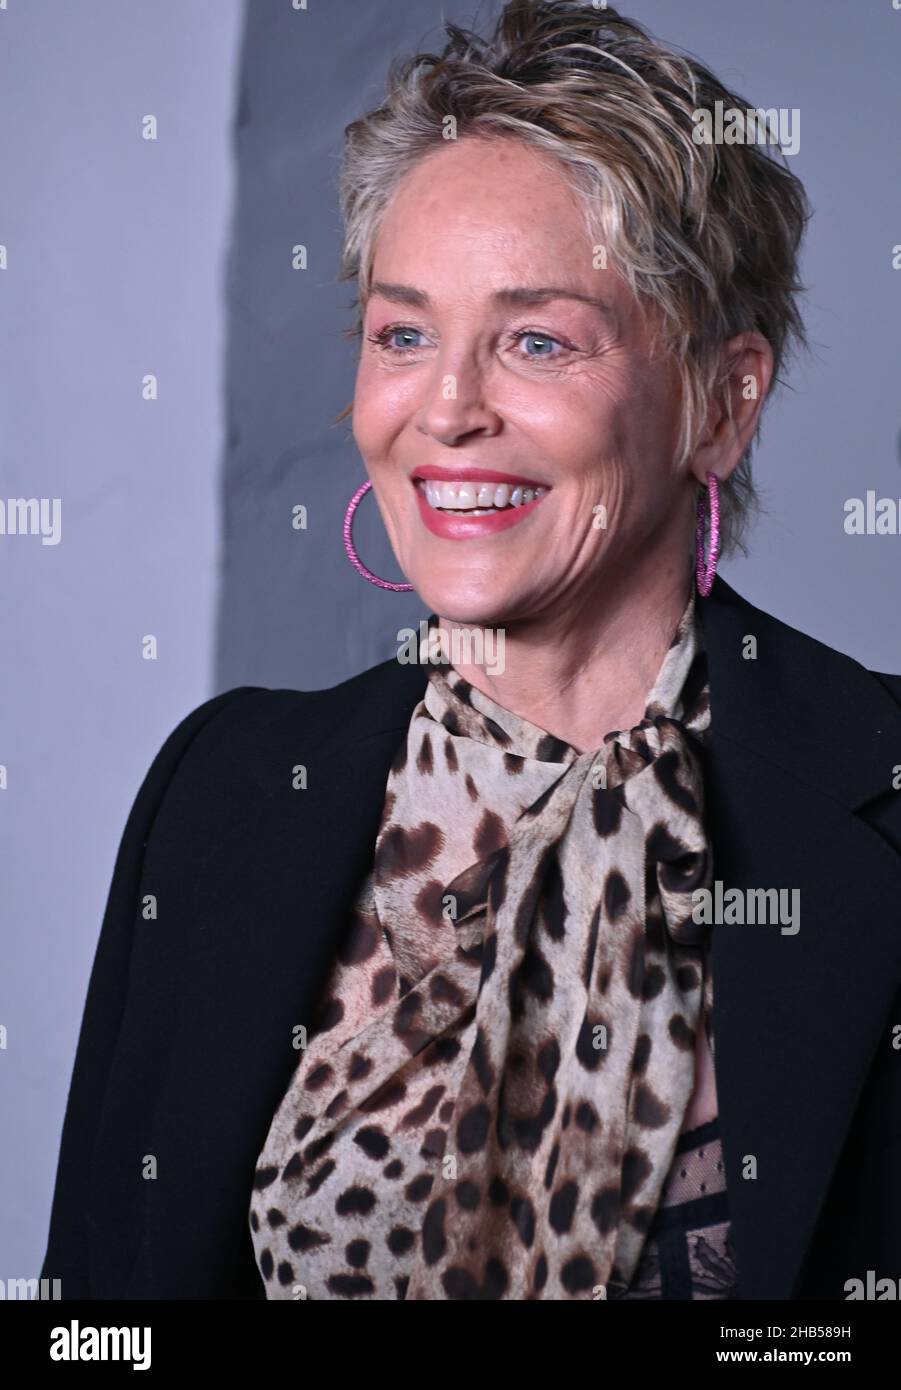 Los Angeles, USA. 16th Dec, 2021. LOS ANGELES, USA. December 16, 2021: Sharon Stone at the premiere of 'The Tragedy of Macbeth' at the Directors Guild of America Theatre. Picture Credit: Paul Smith/Alamy Live News Stock Photo